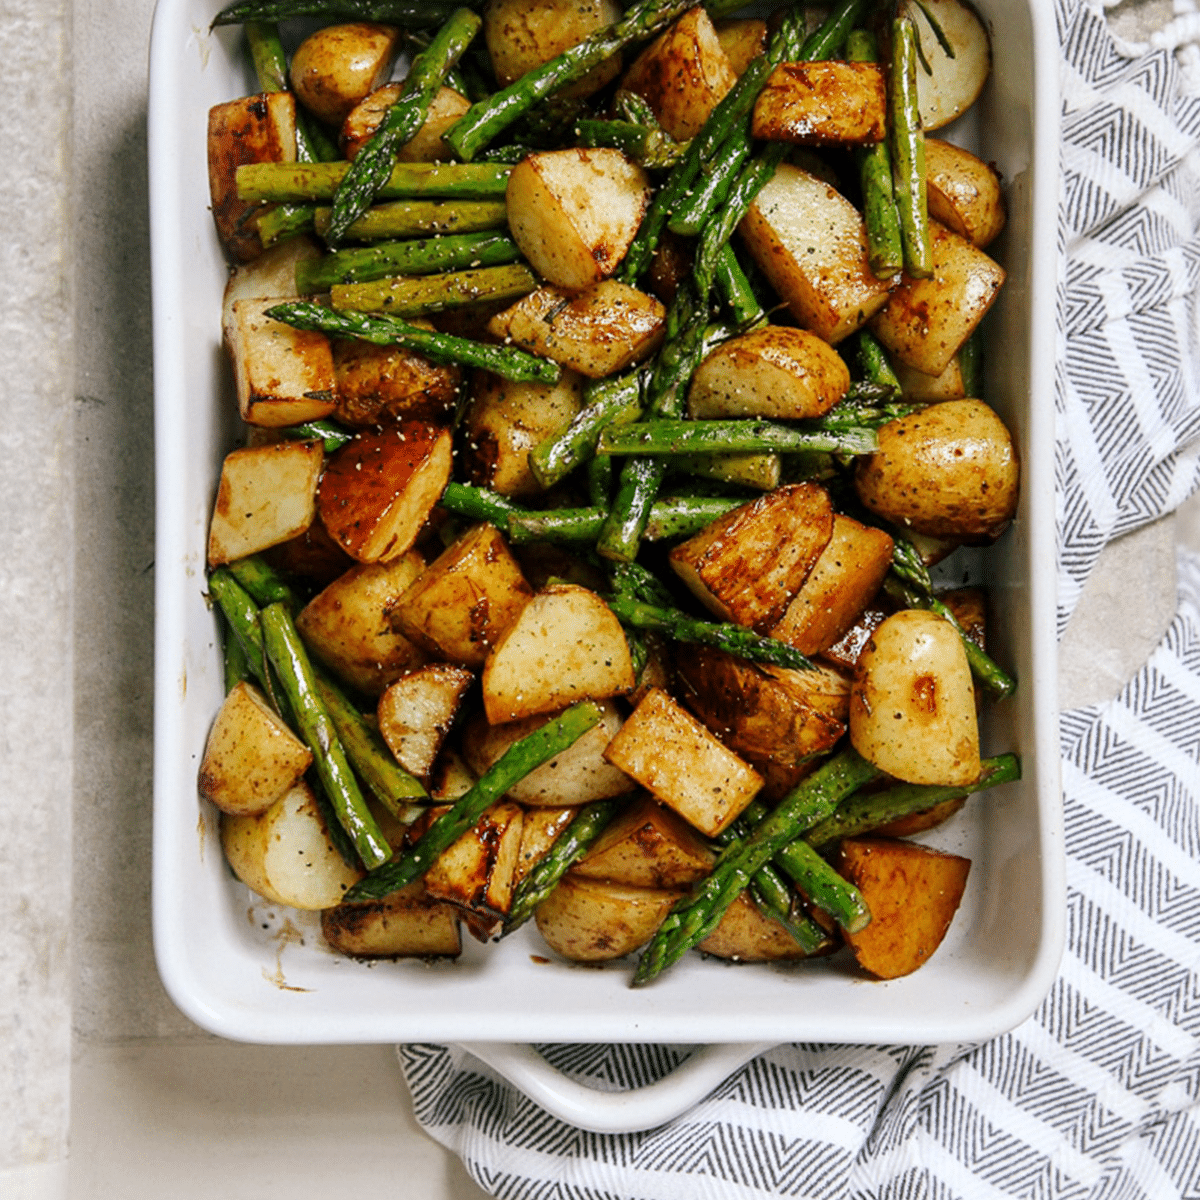 Balsamic Roasted New Potatoes with Asparagus - Vegan & Gluten-free